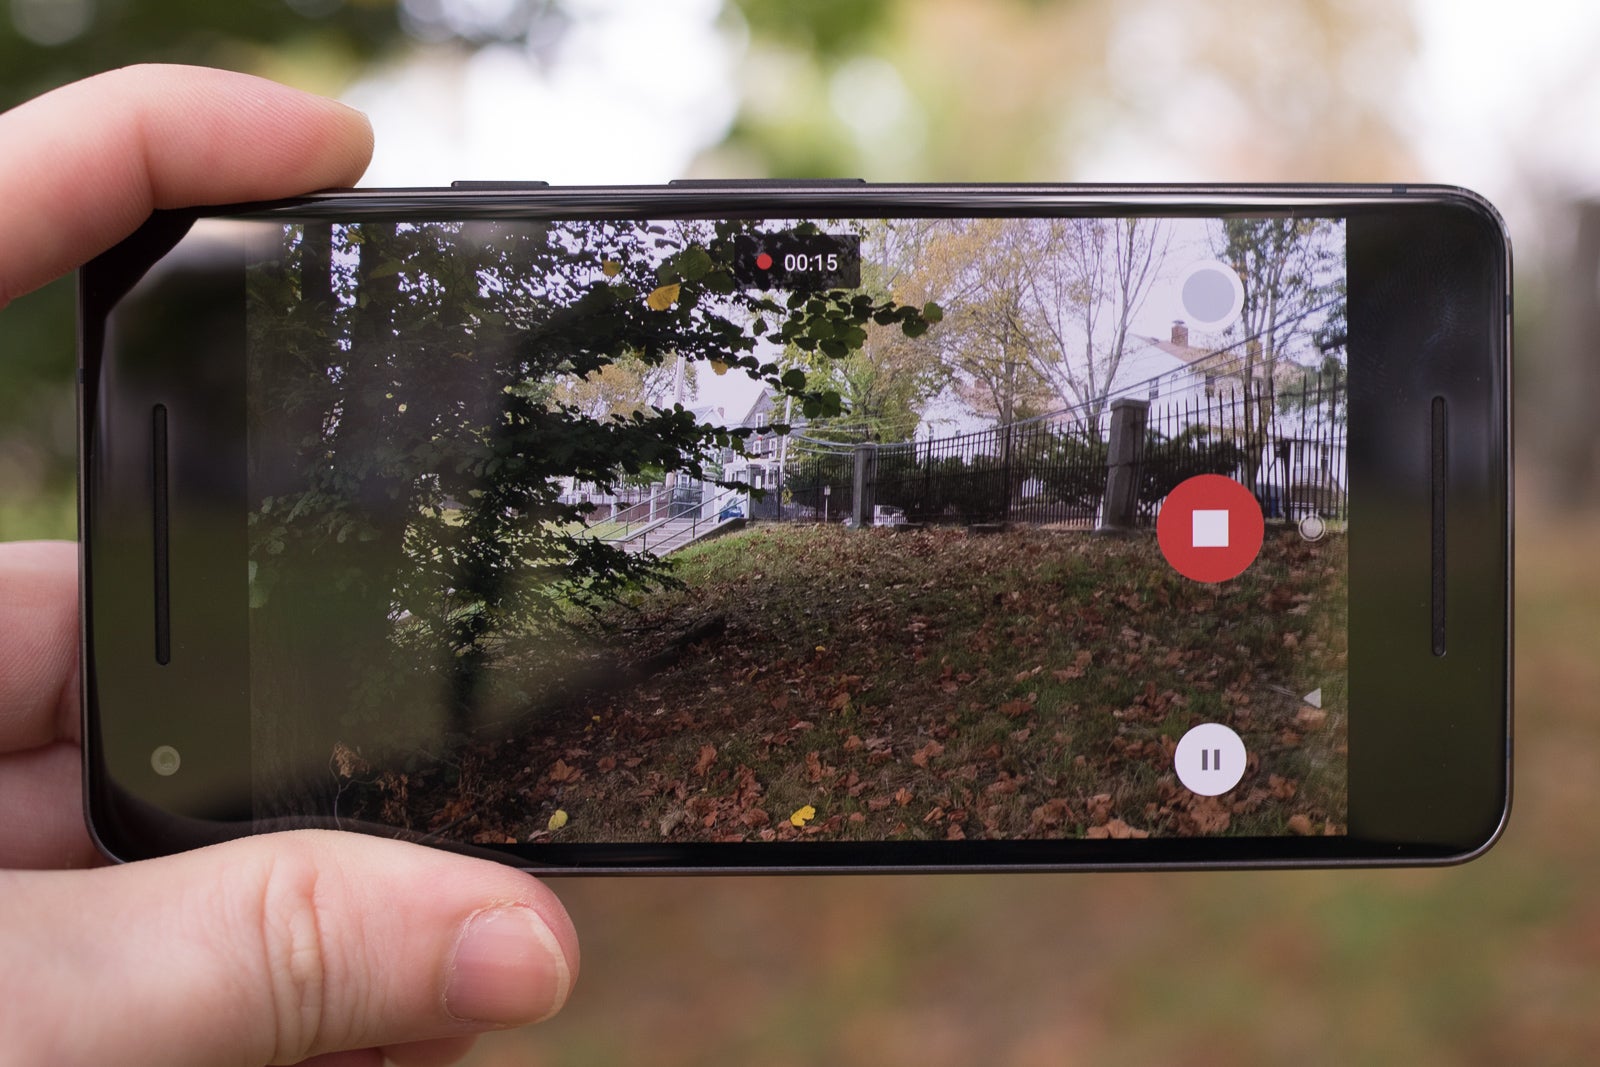 Google looking into Pixel 2 clicking sound issue, offers temporary solution